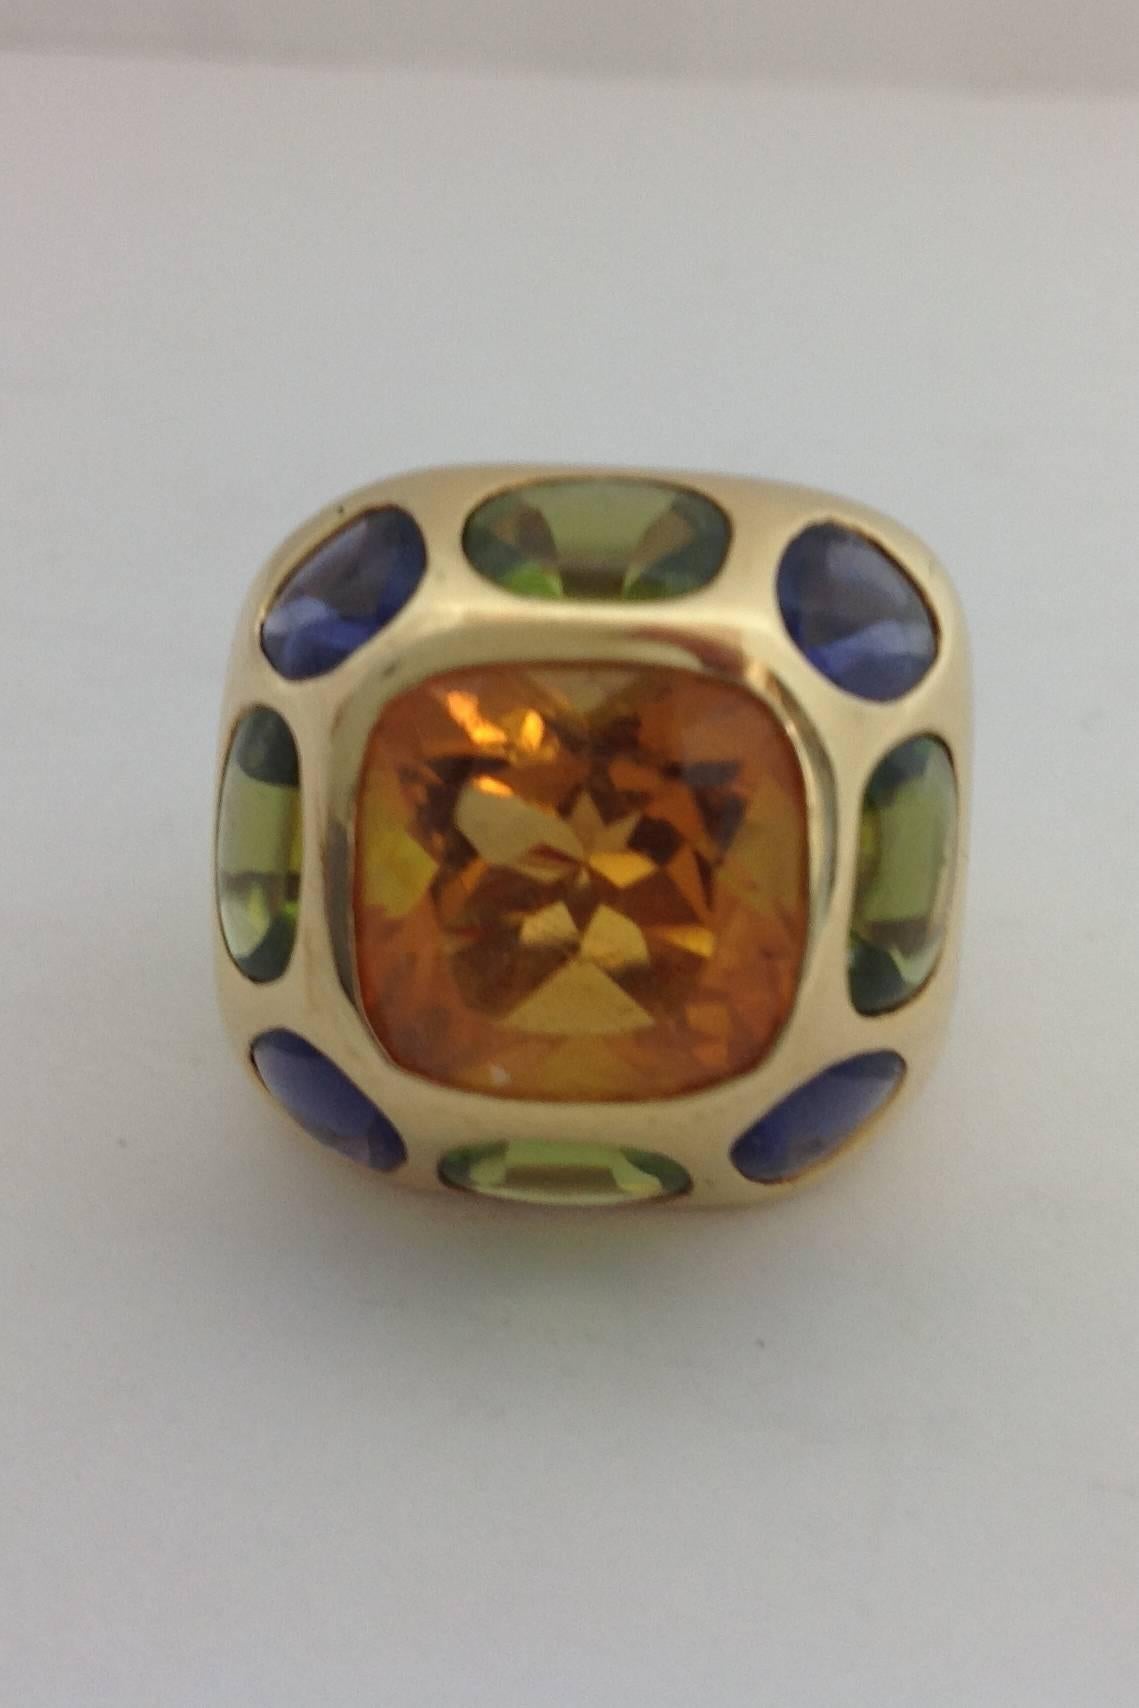 18K gold Chanel ring from the Baroque Collection.
Center stone 12mm X 12mm Citrine.
4 Cabochon 5mm X 7.5mm oval peridot.
4 5mm X 6mm oval iolites. 
.86